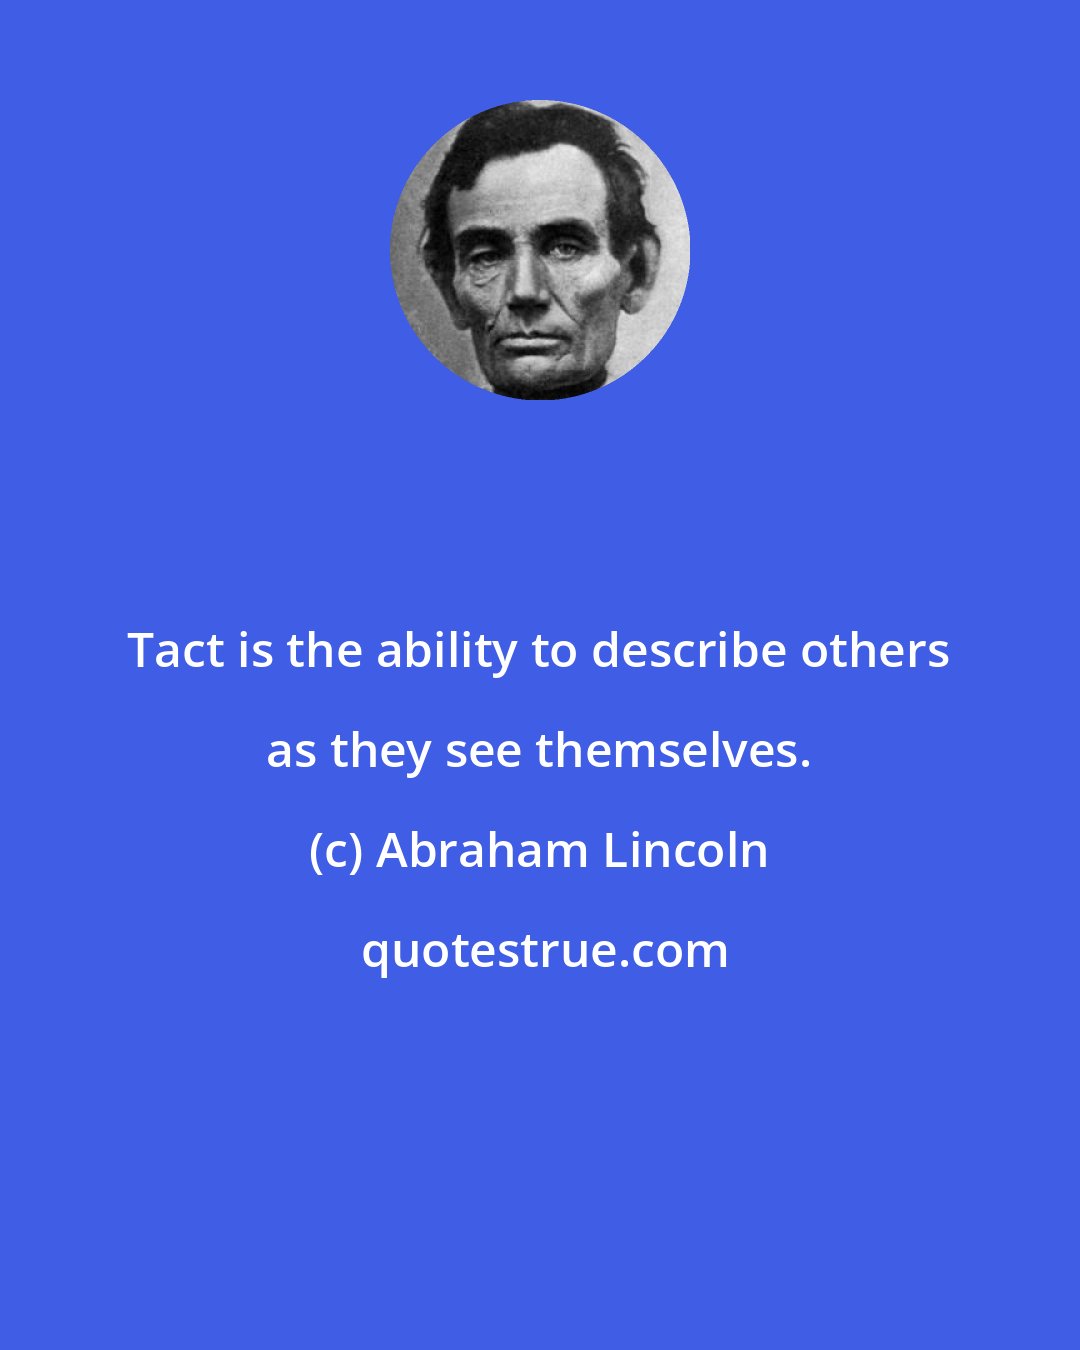 Abraham Lincoln: Tact is the ability to describe others as they see themselves.